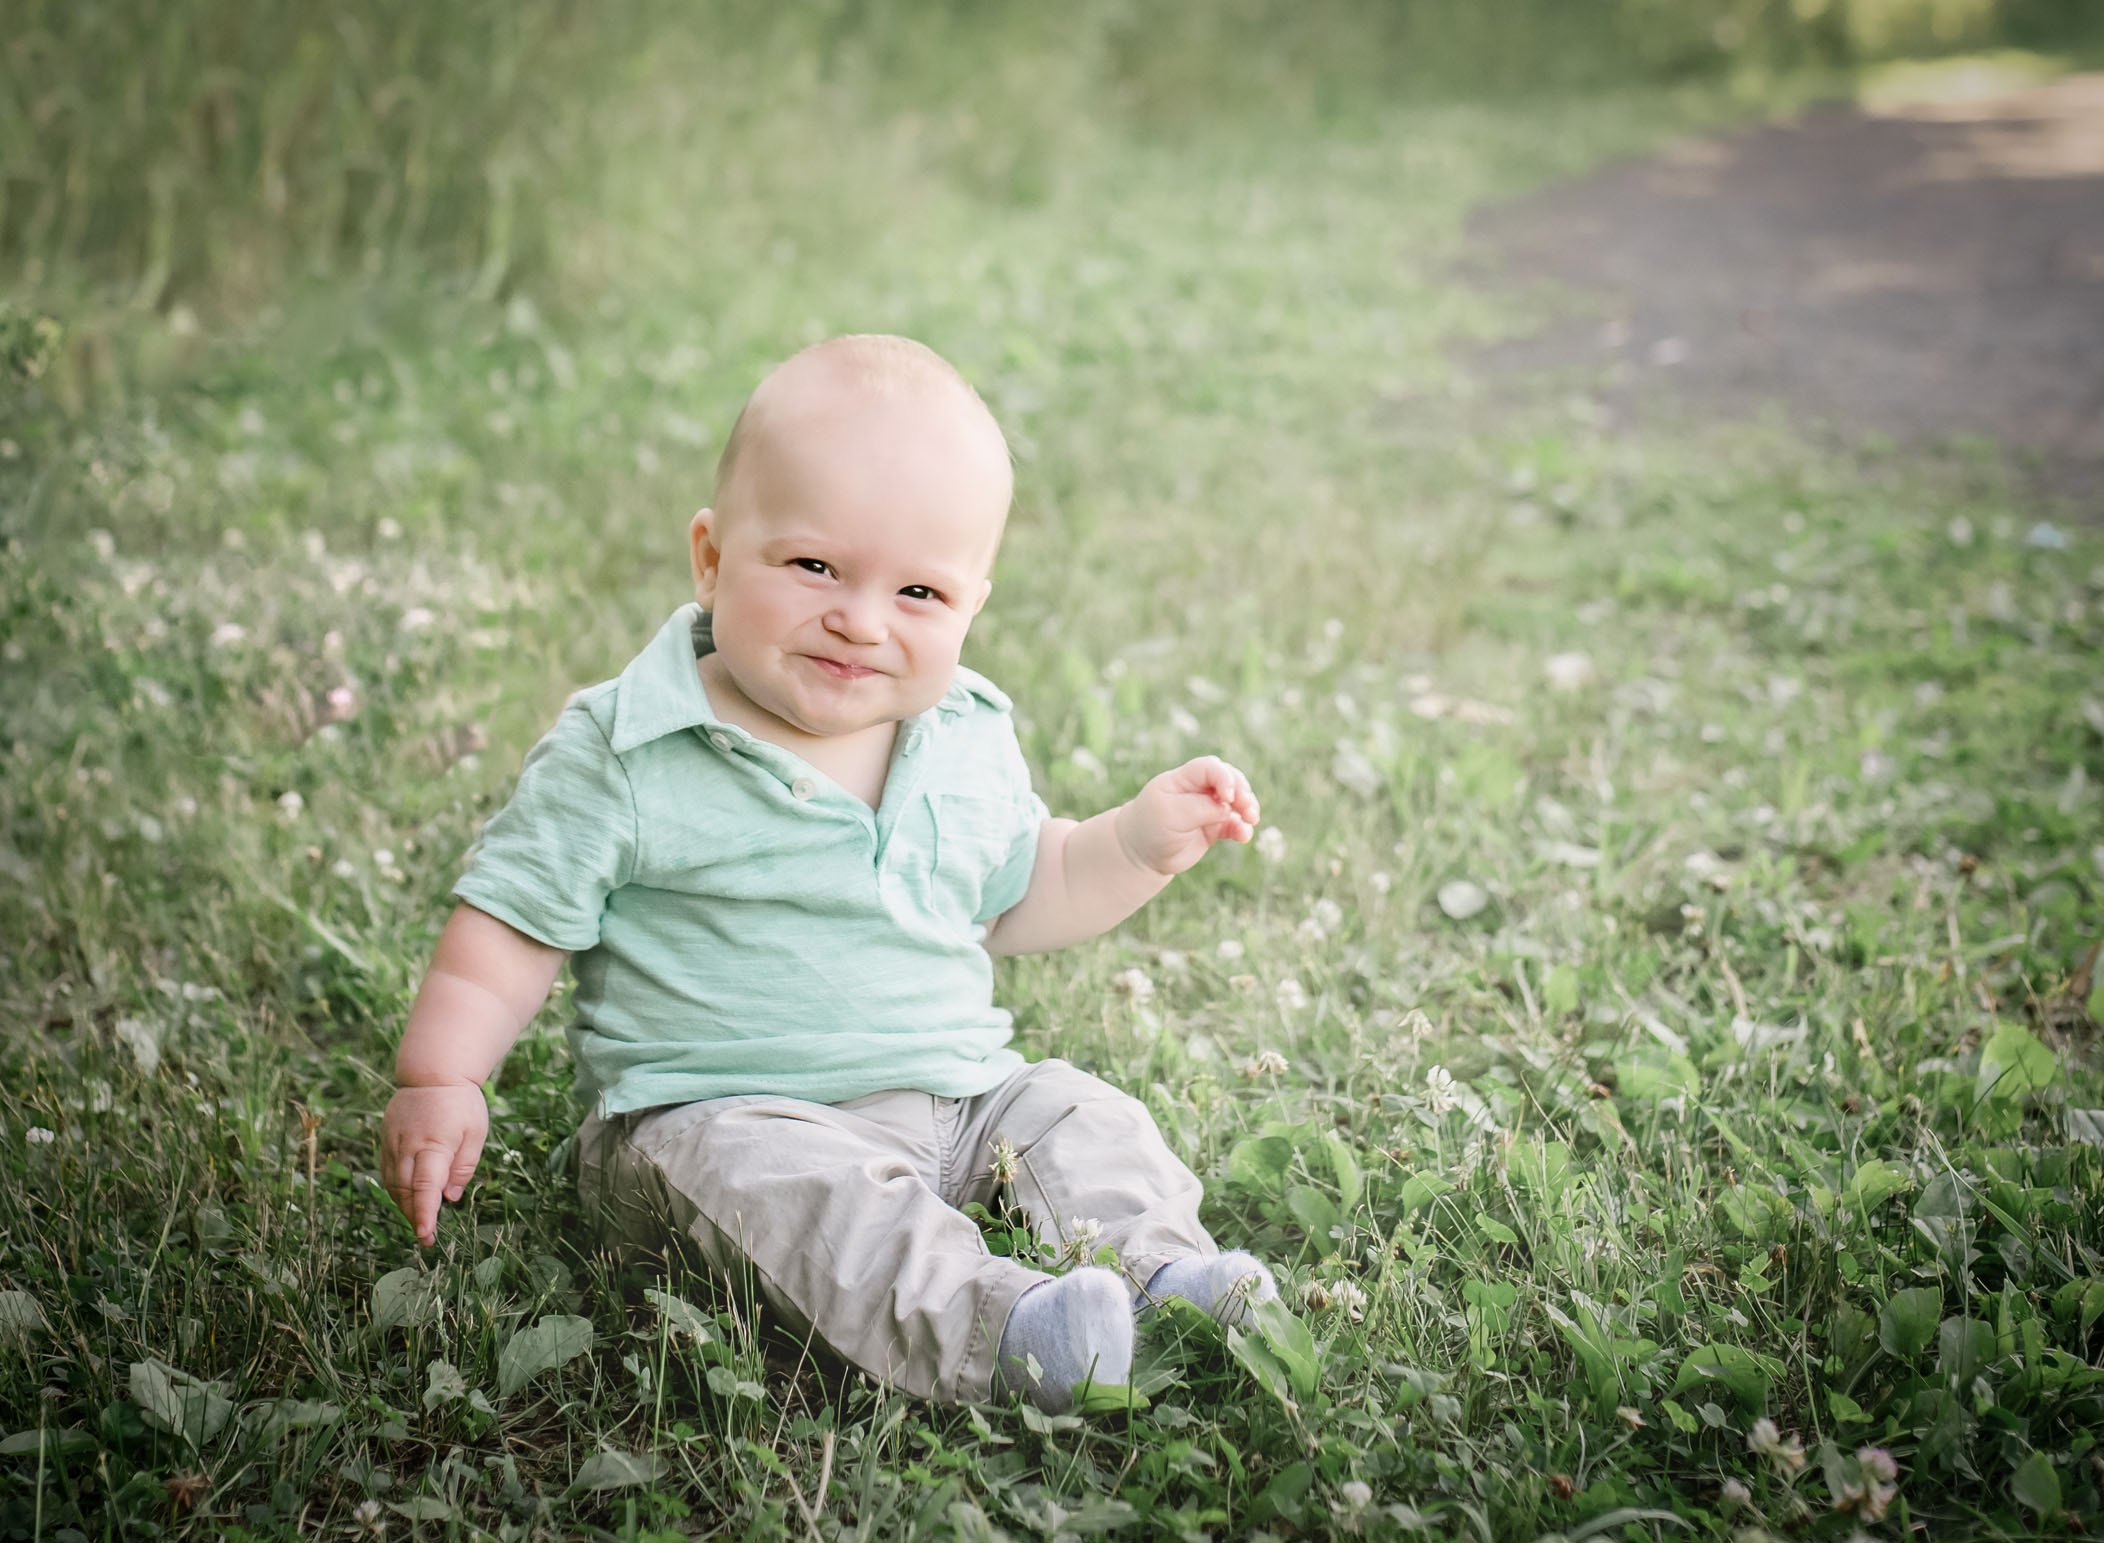 6 month old baby boy sitting up in the grass grinning